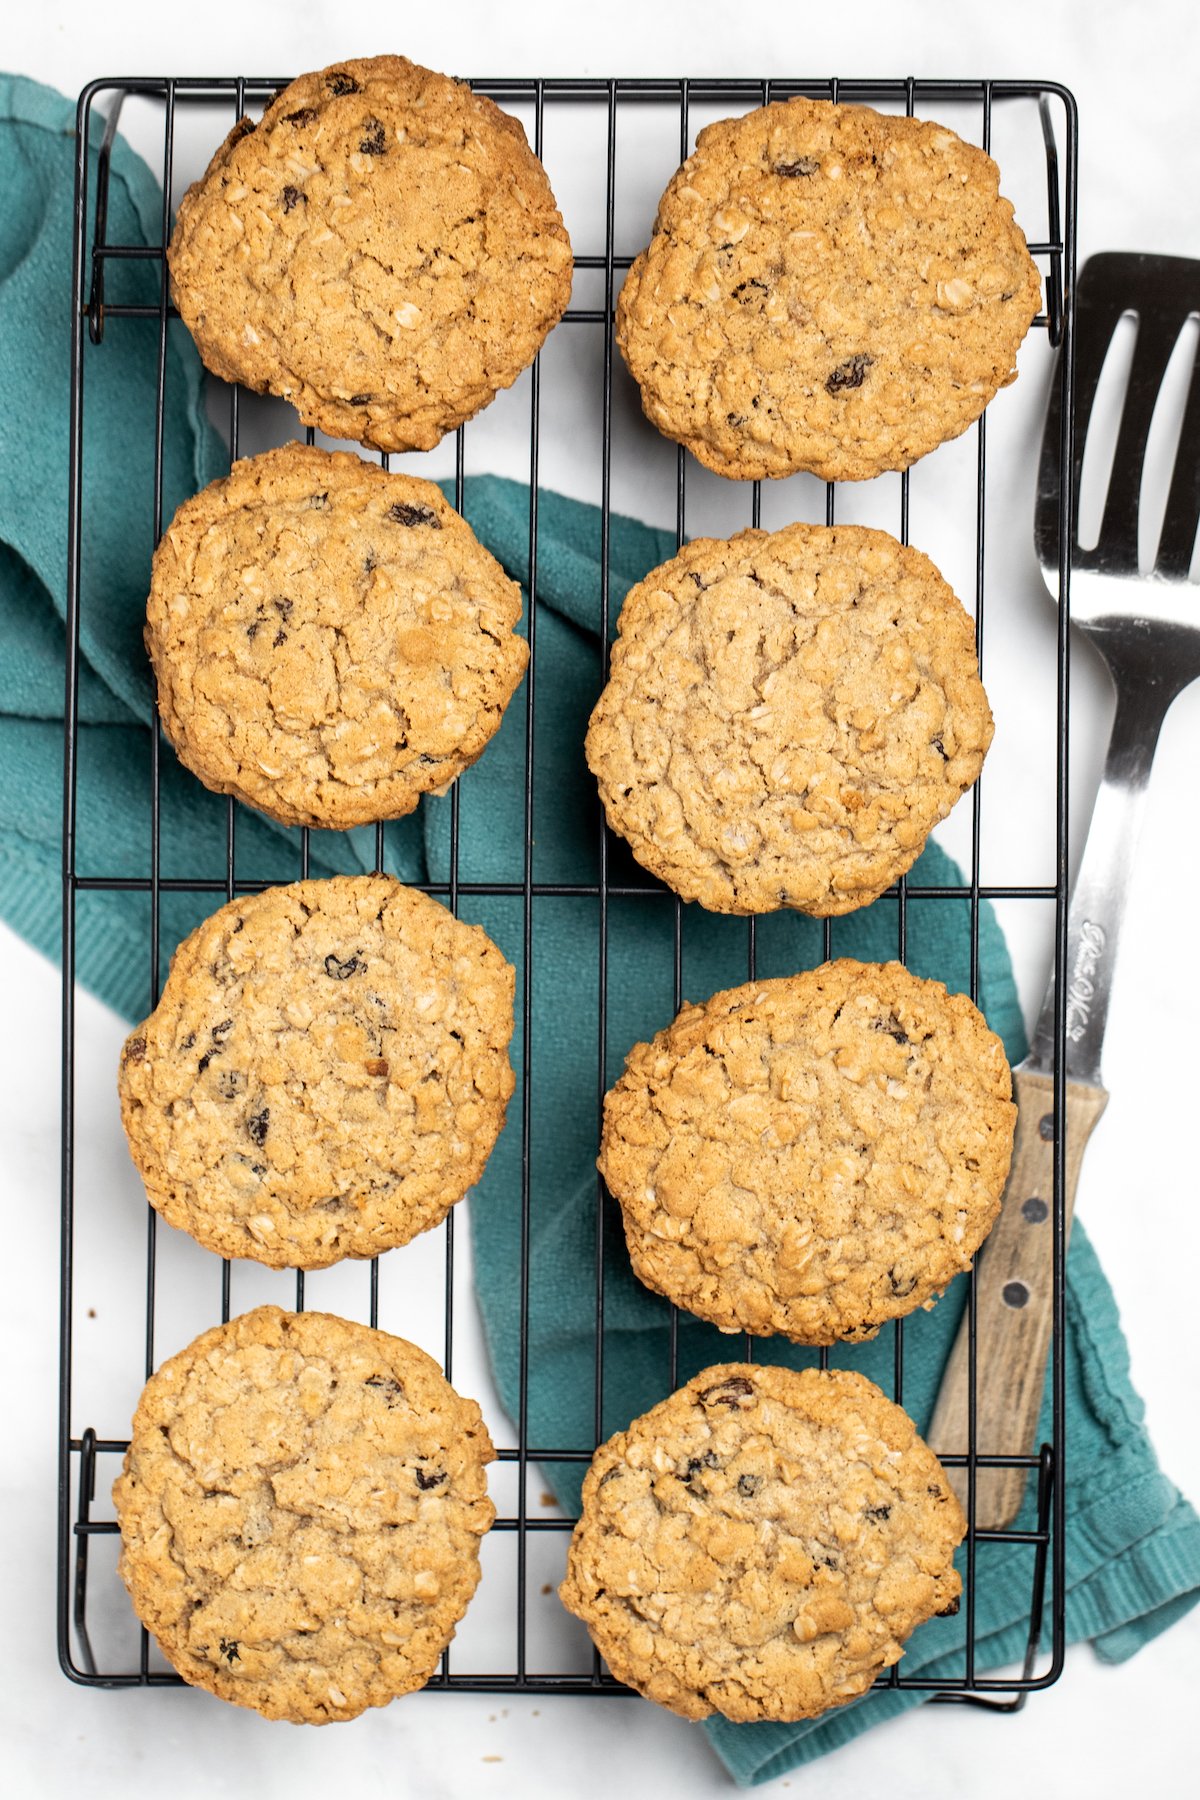 Gluten free oatmeal cookies on a cooling rack over a kitchen towel with a spatula on the side.